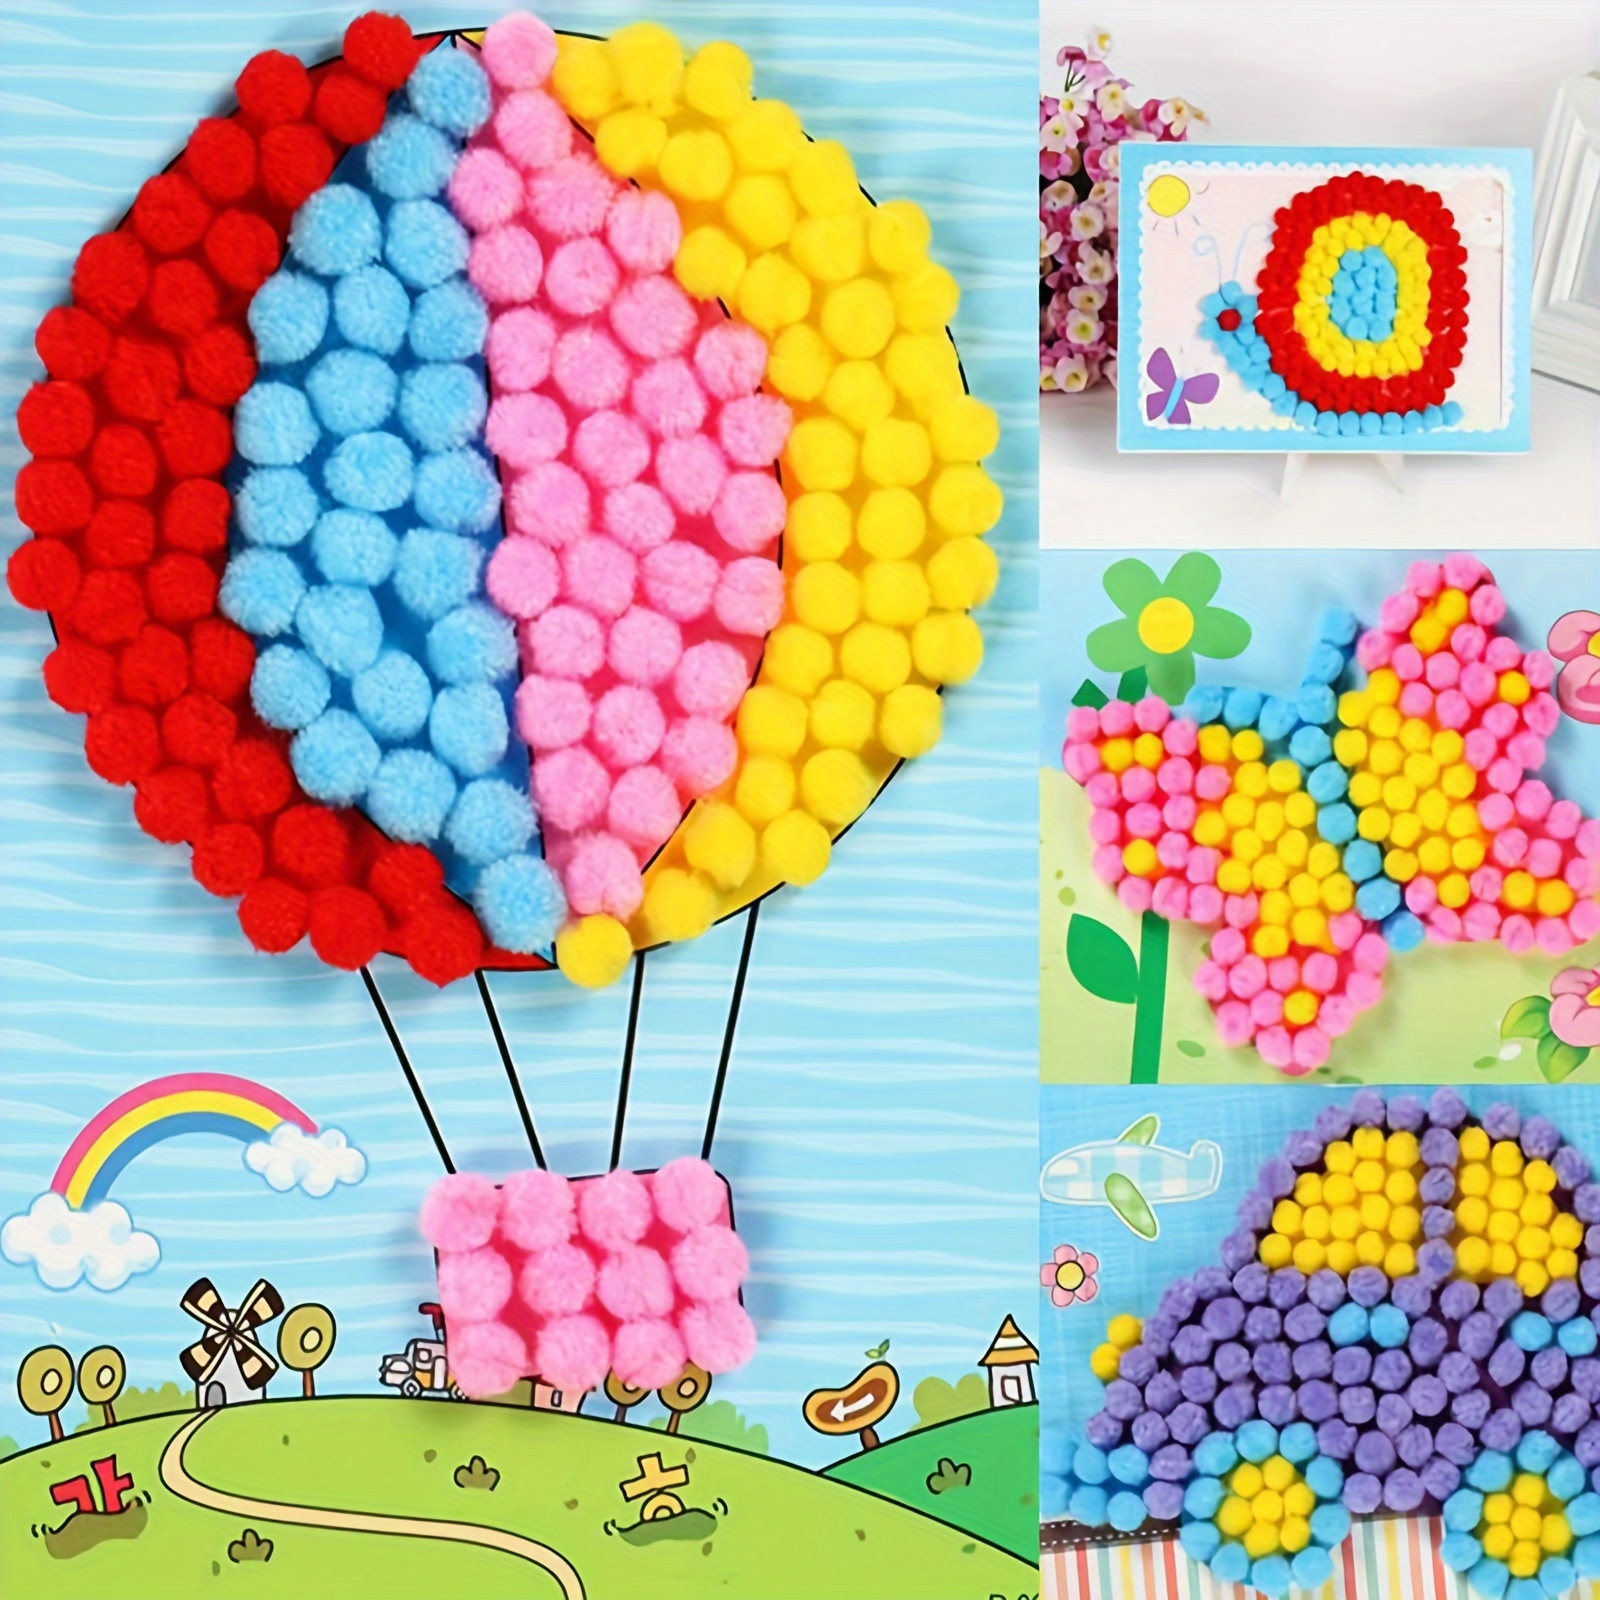 1200pcs/1050pcs Multicolor Pom Poms, Assorted Sizes & Colors Craft Pompom  Balls With 150pcs Wiggly Eyes For Kids Arts And Craft Projects And Decoratio